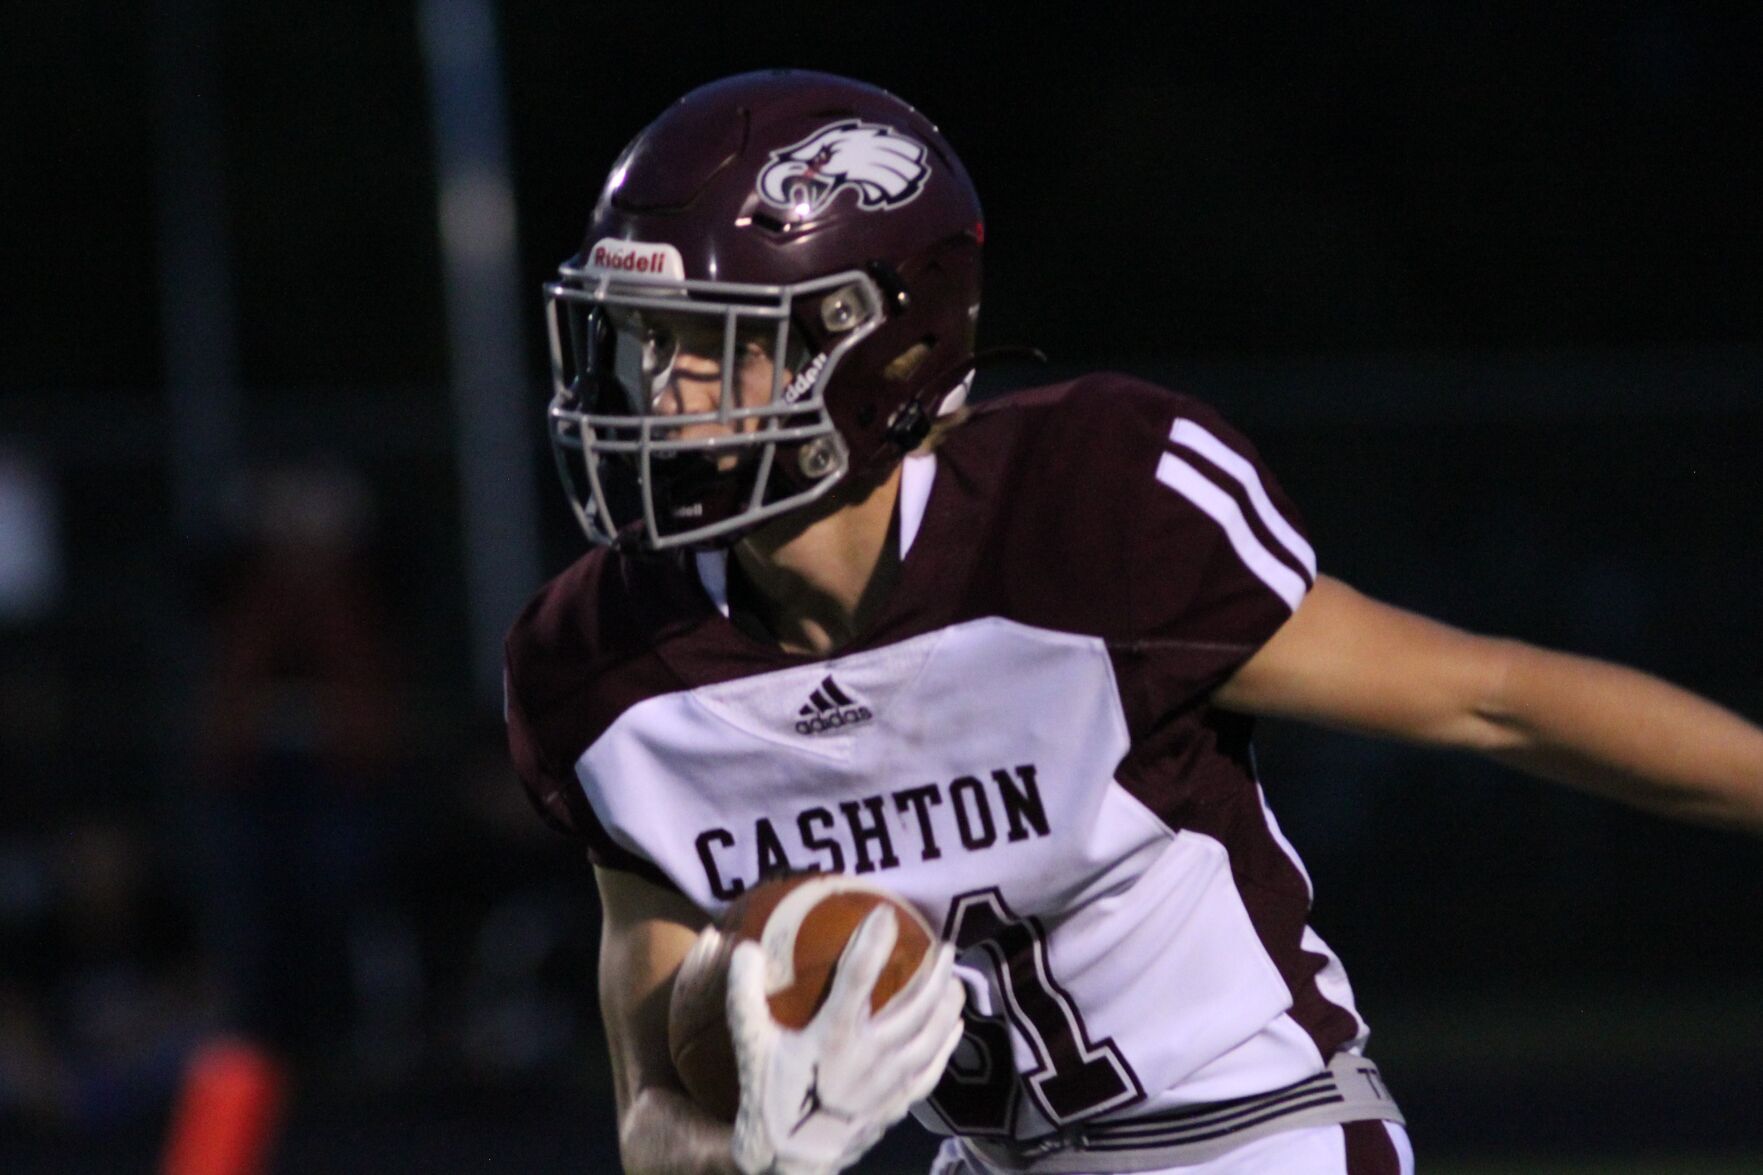 Cashton High School Football Team Impresses with 6-0 Record and Championship Potential